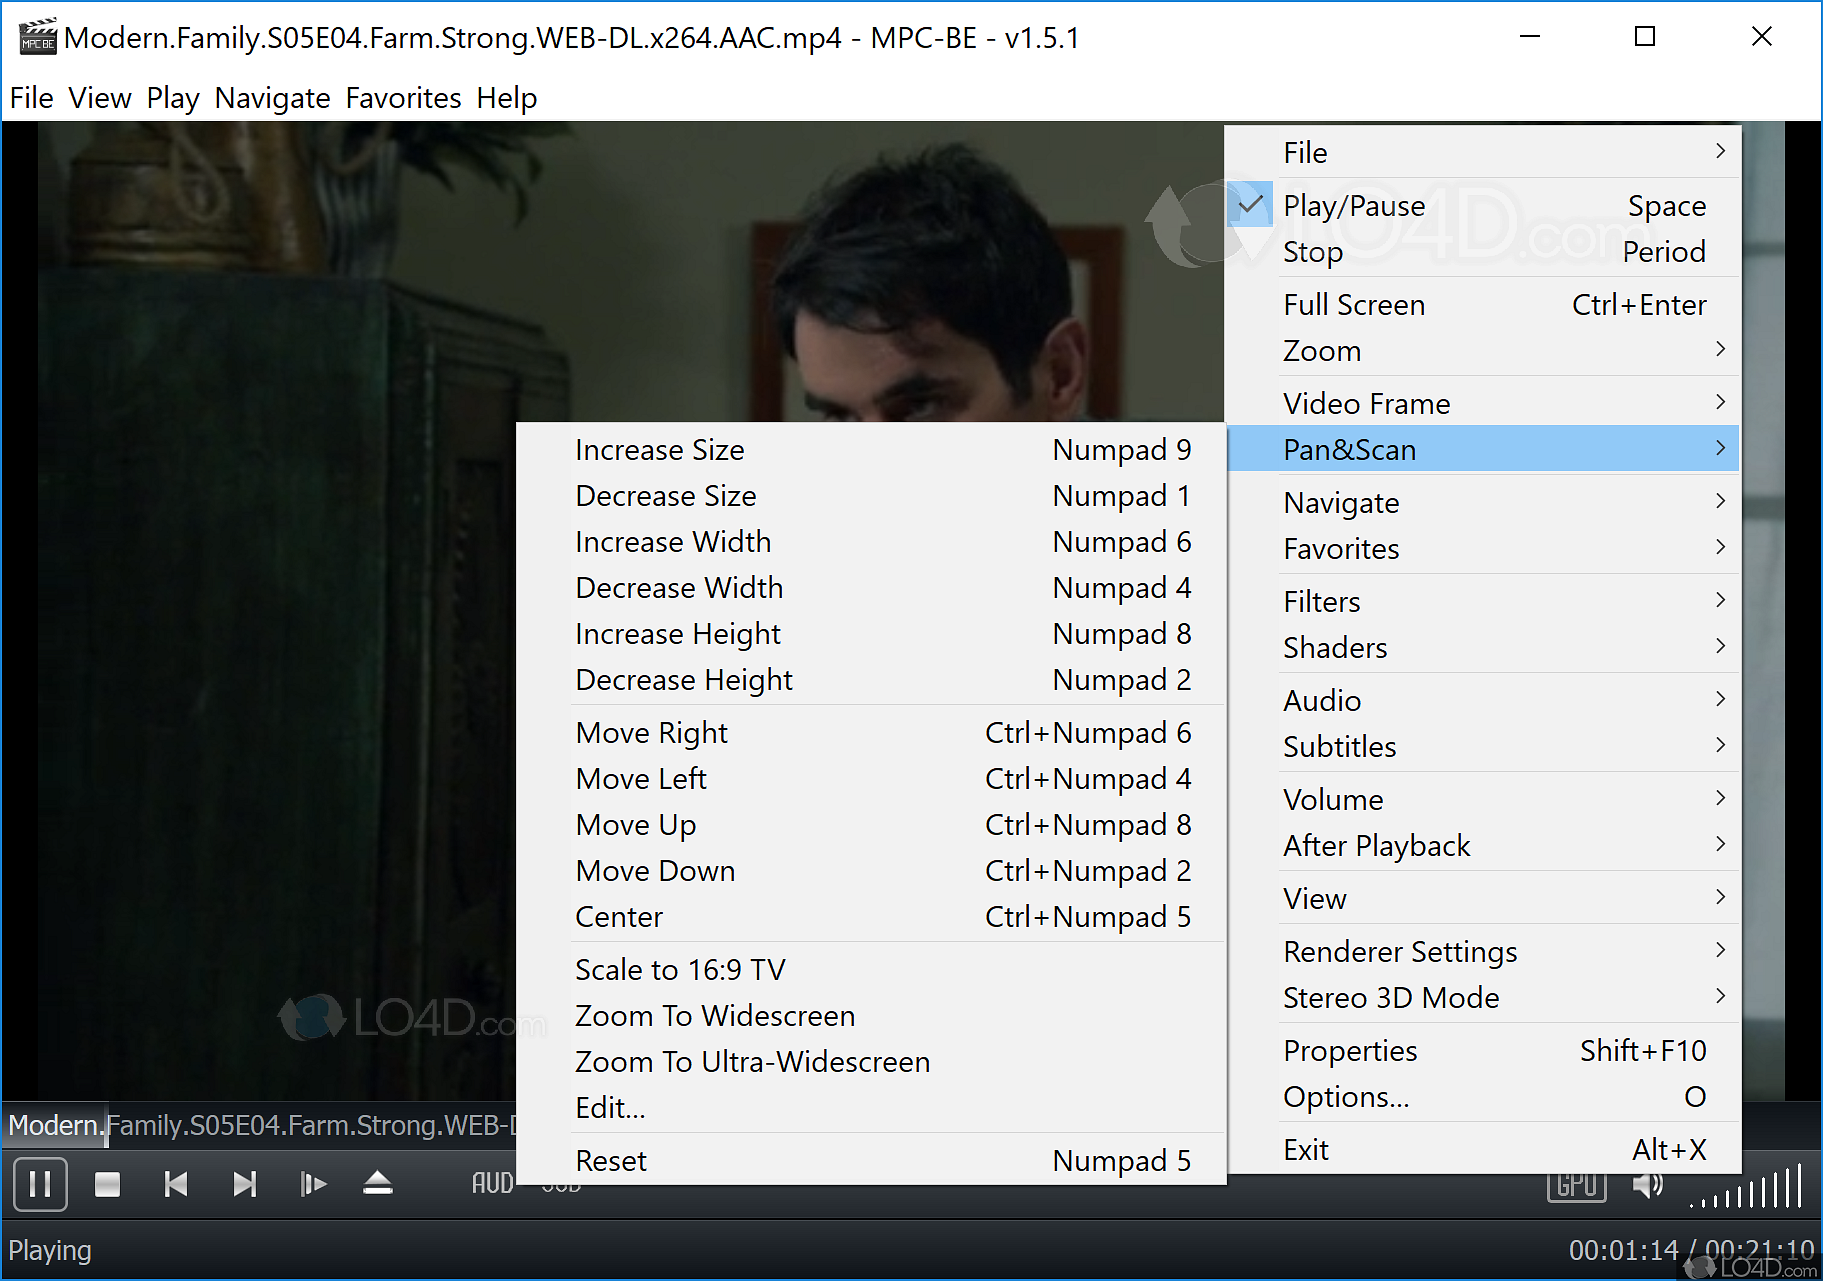 media player classic download for windows 10